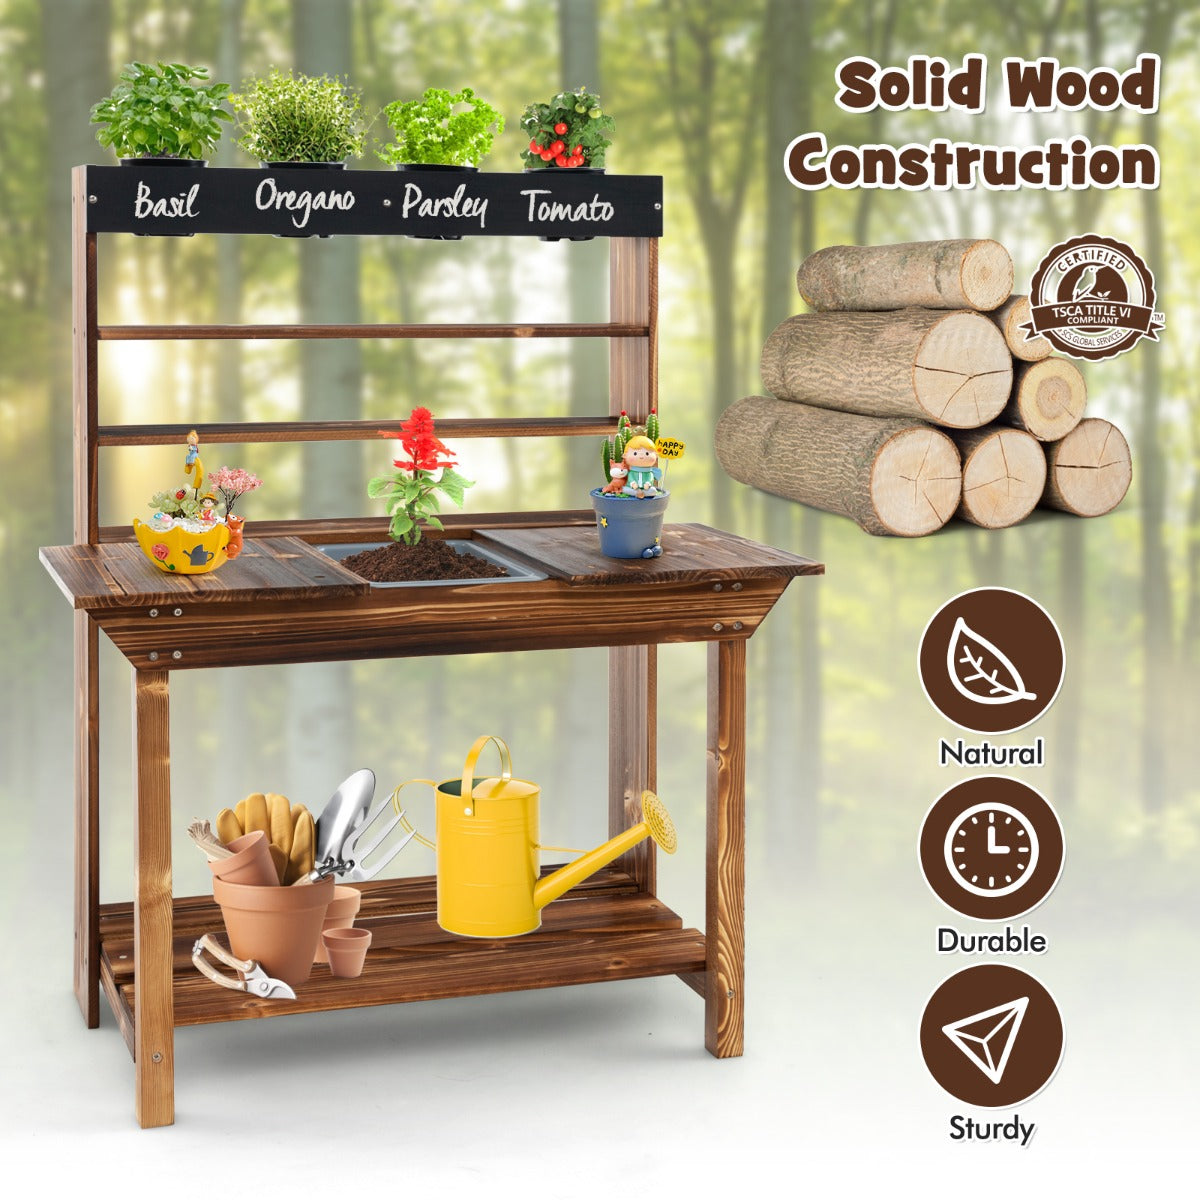 Kids Potting Bench Wooden Toy Gardening Center with 4 Pots